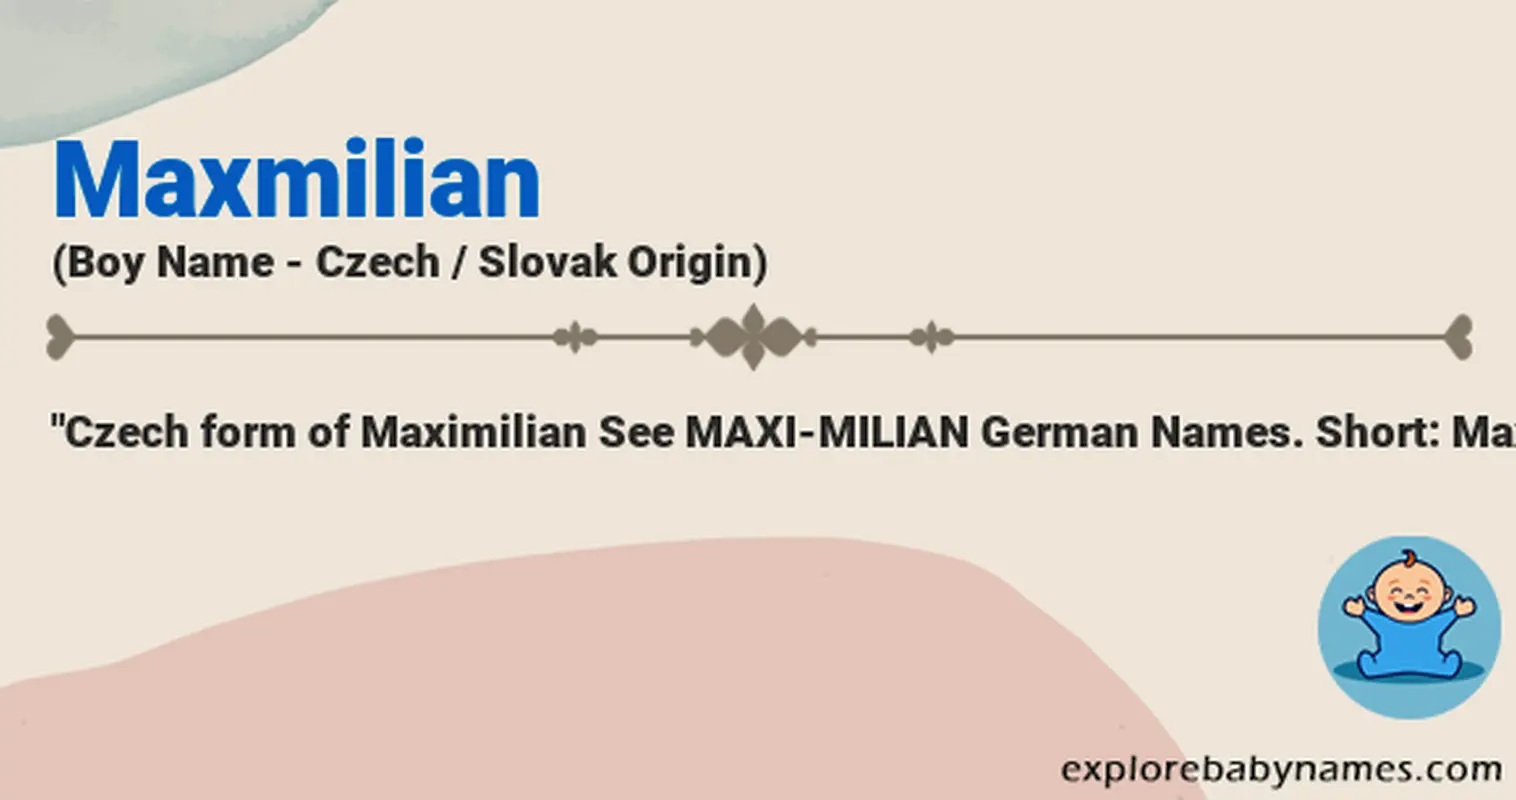 Meaning of Maxmilian